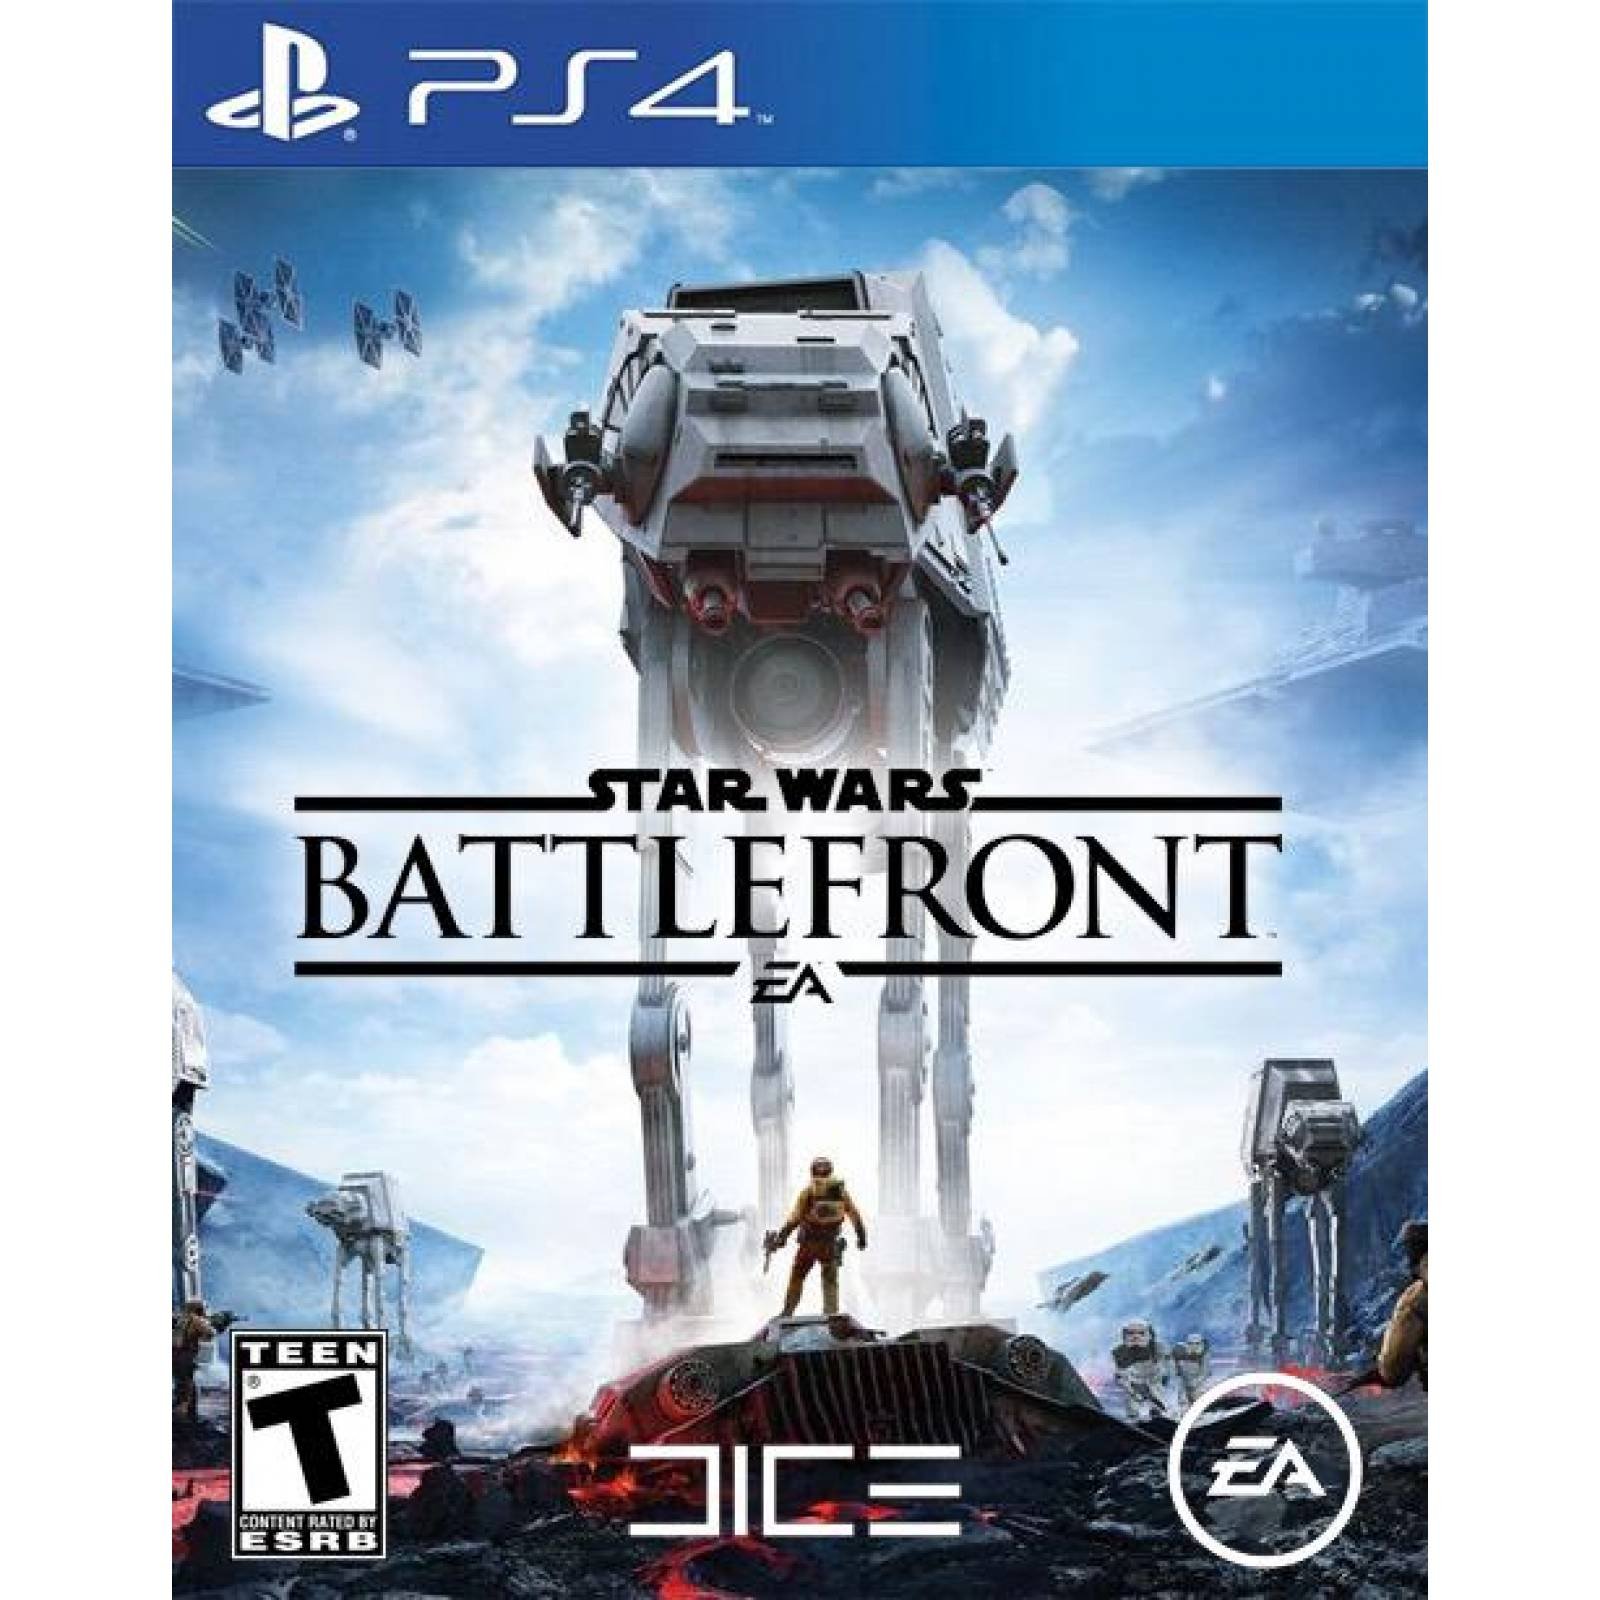 star-wars-battlefront-2-ps4-characters-at-darren-s-world-of-entertainment-star-wars